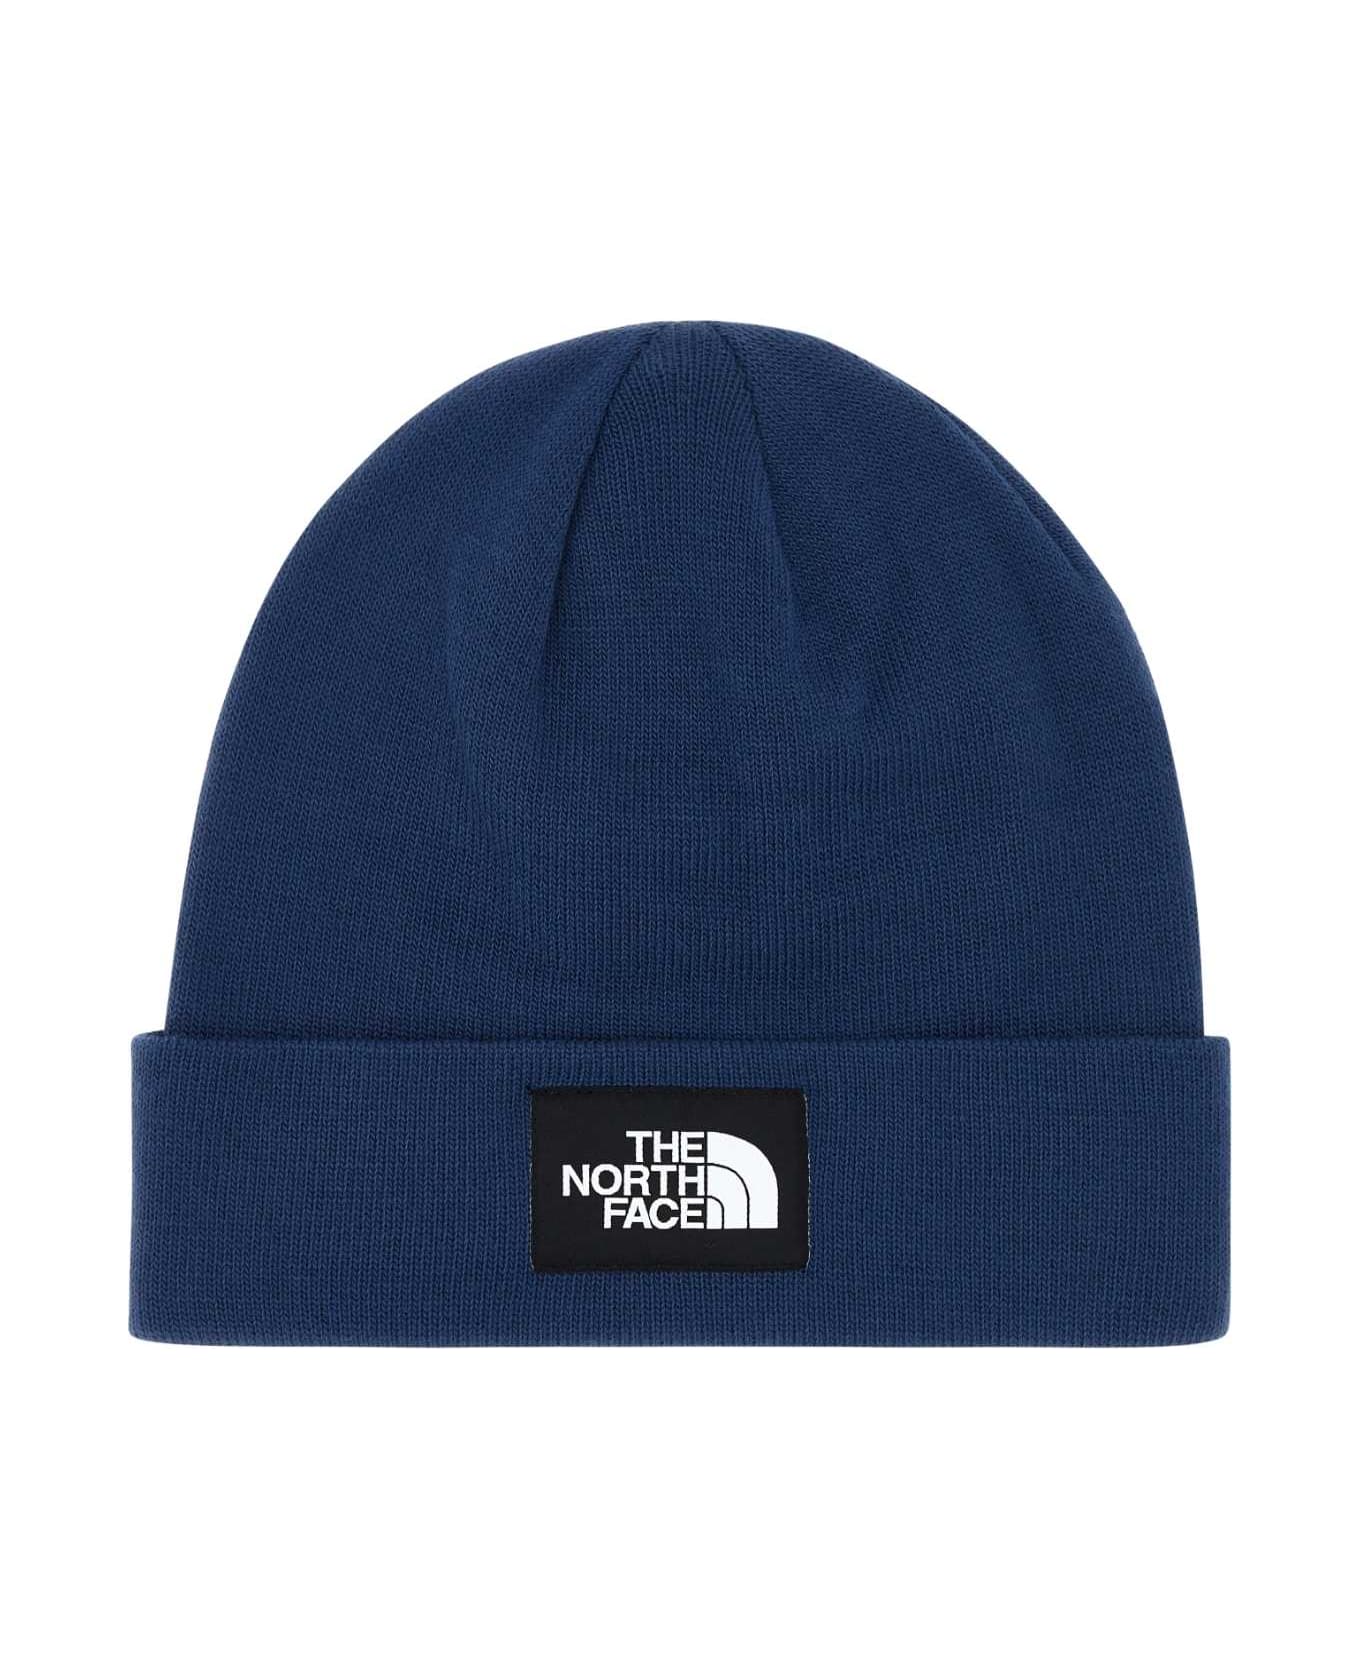 The North Face Navy Blue Stretch Polyester Blend Beanie Hat - SHADY BLUE